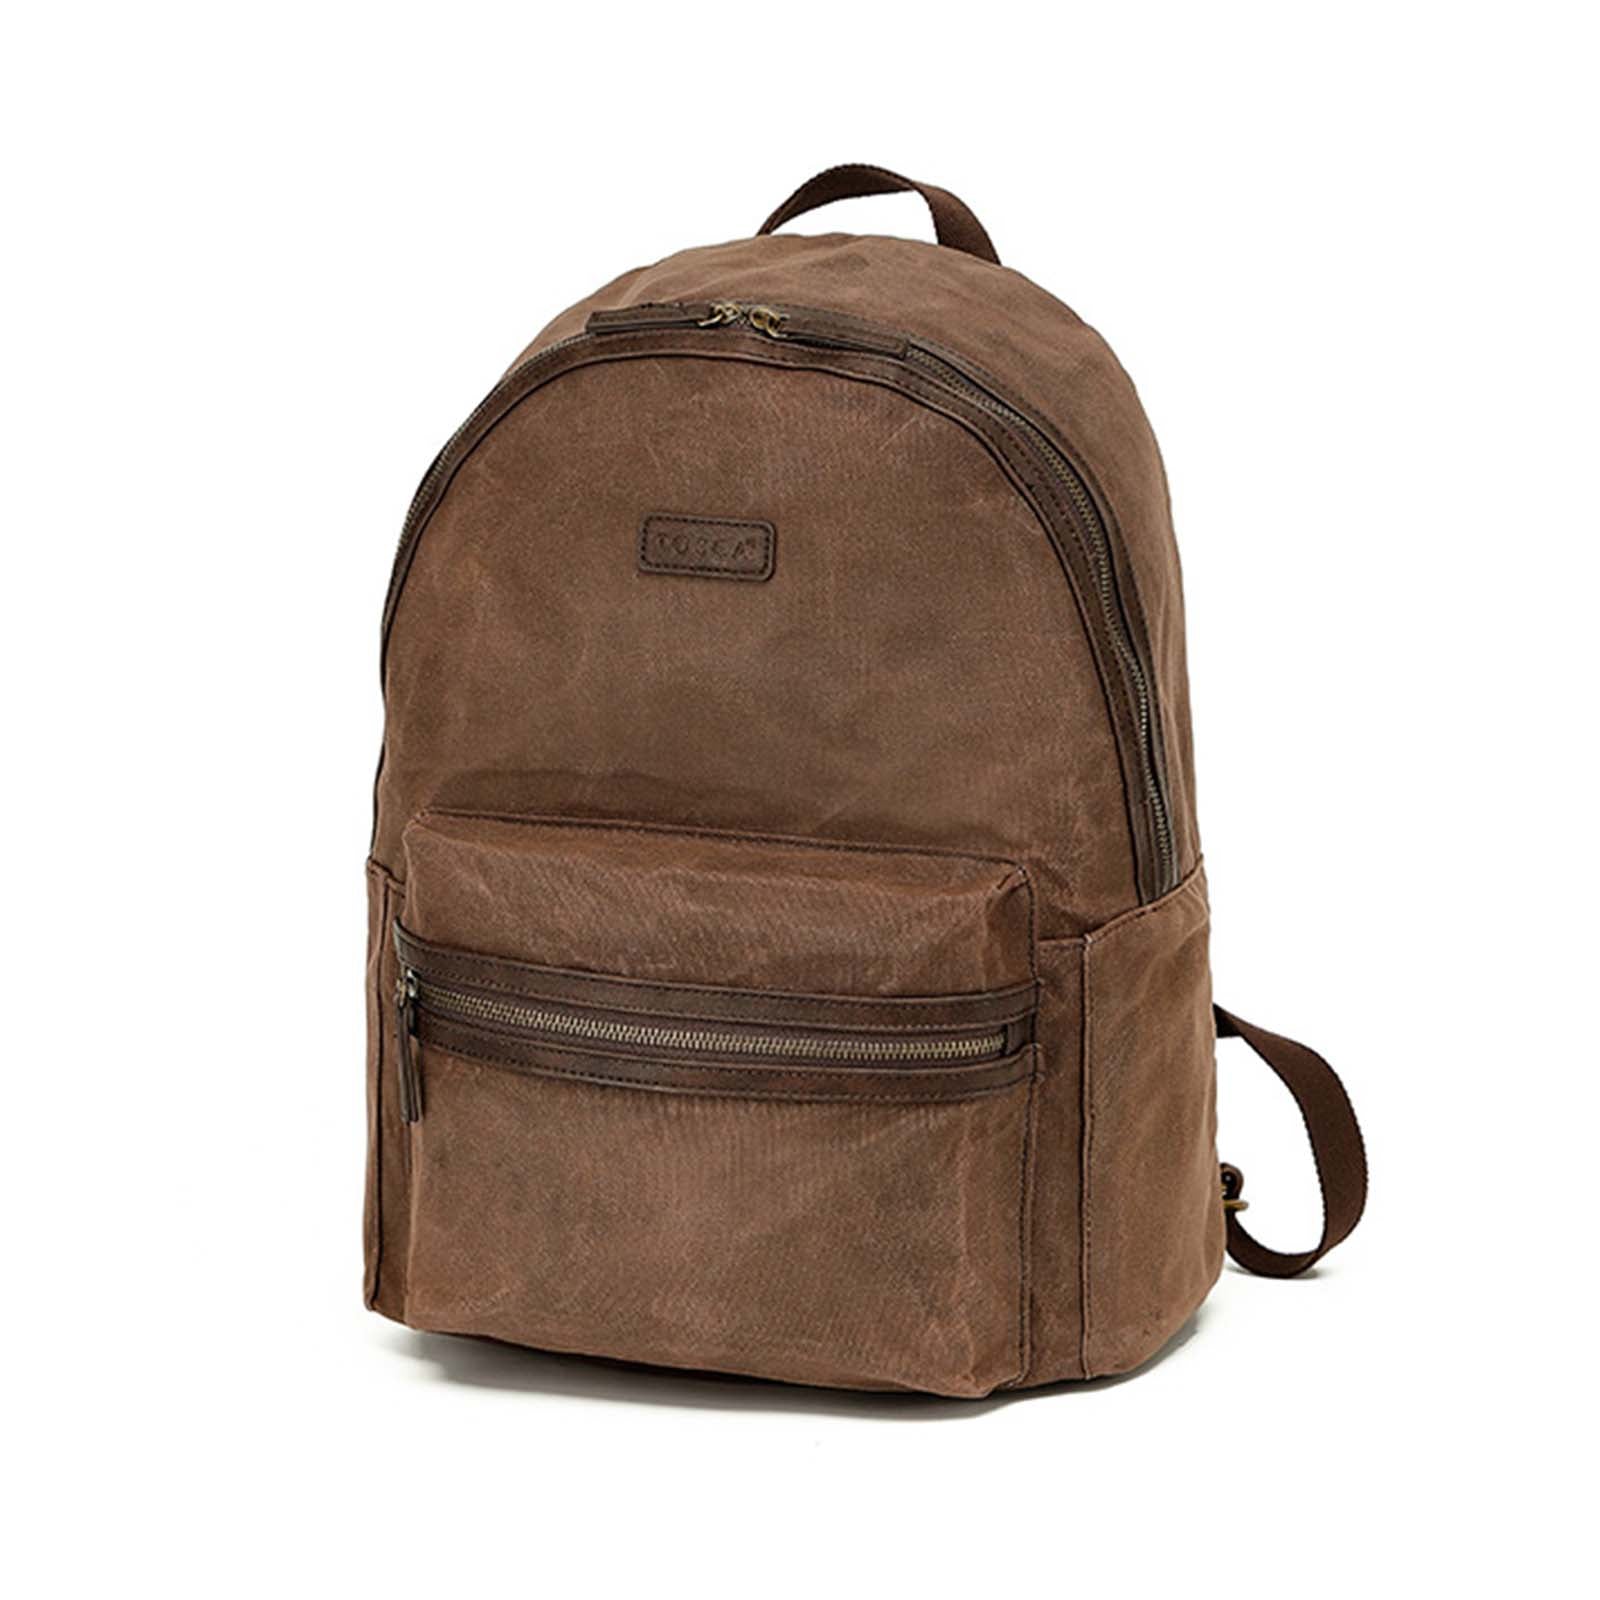 Tosca_Waxed_Canvas_Backpack_Brown_Front.jpg